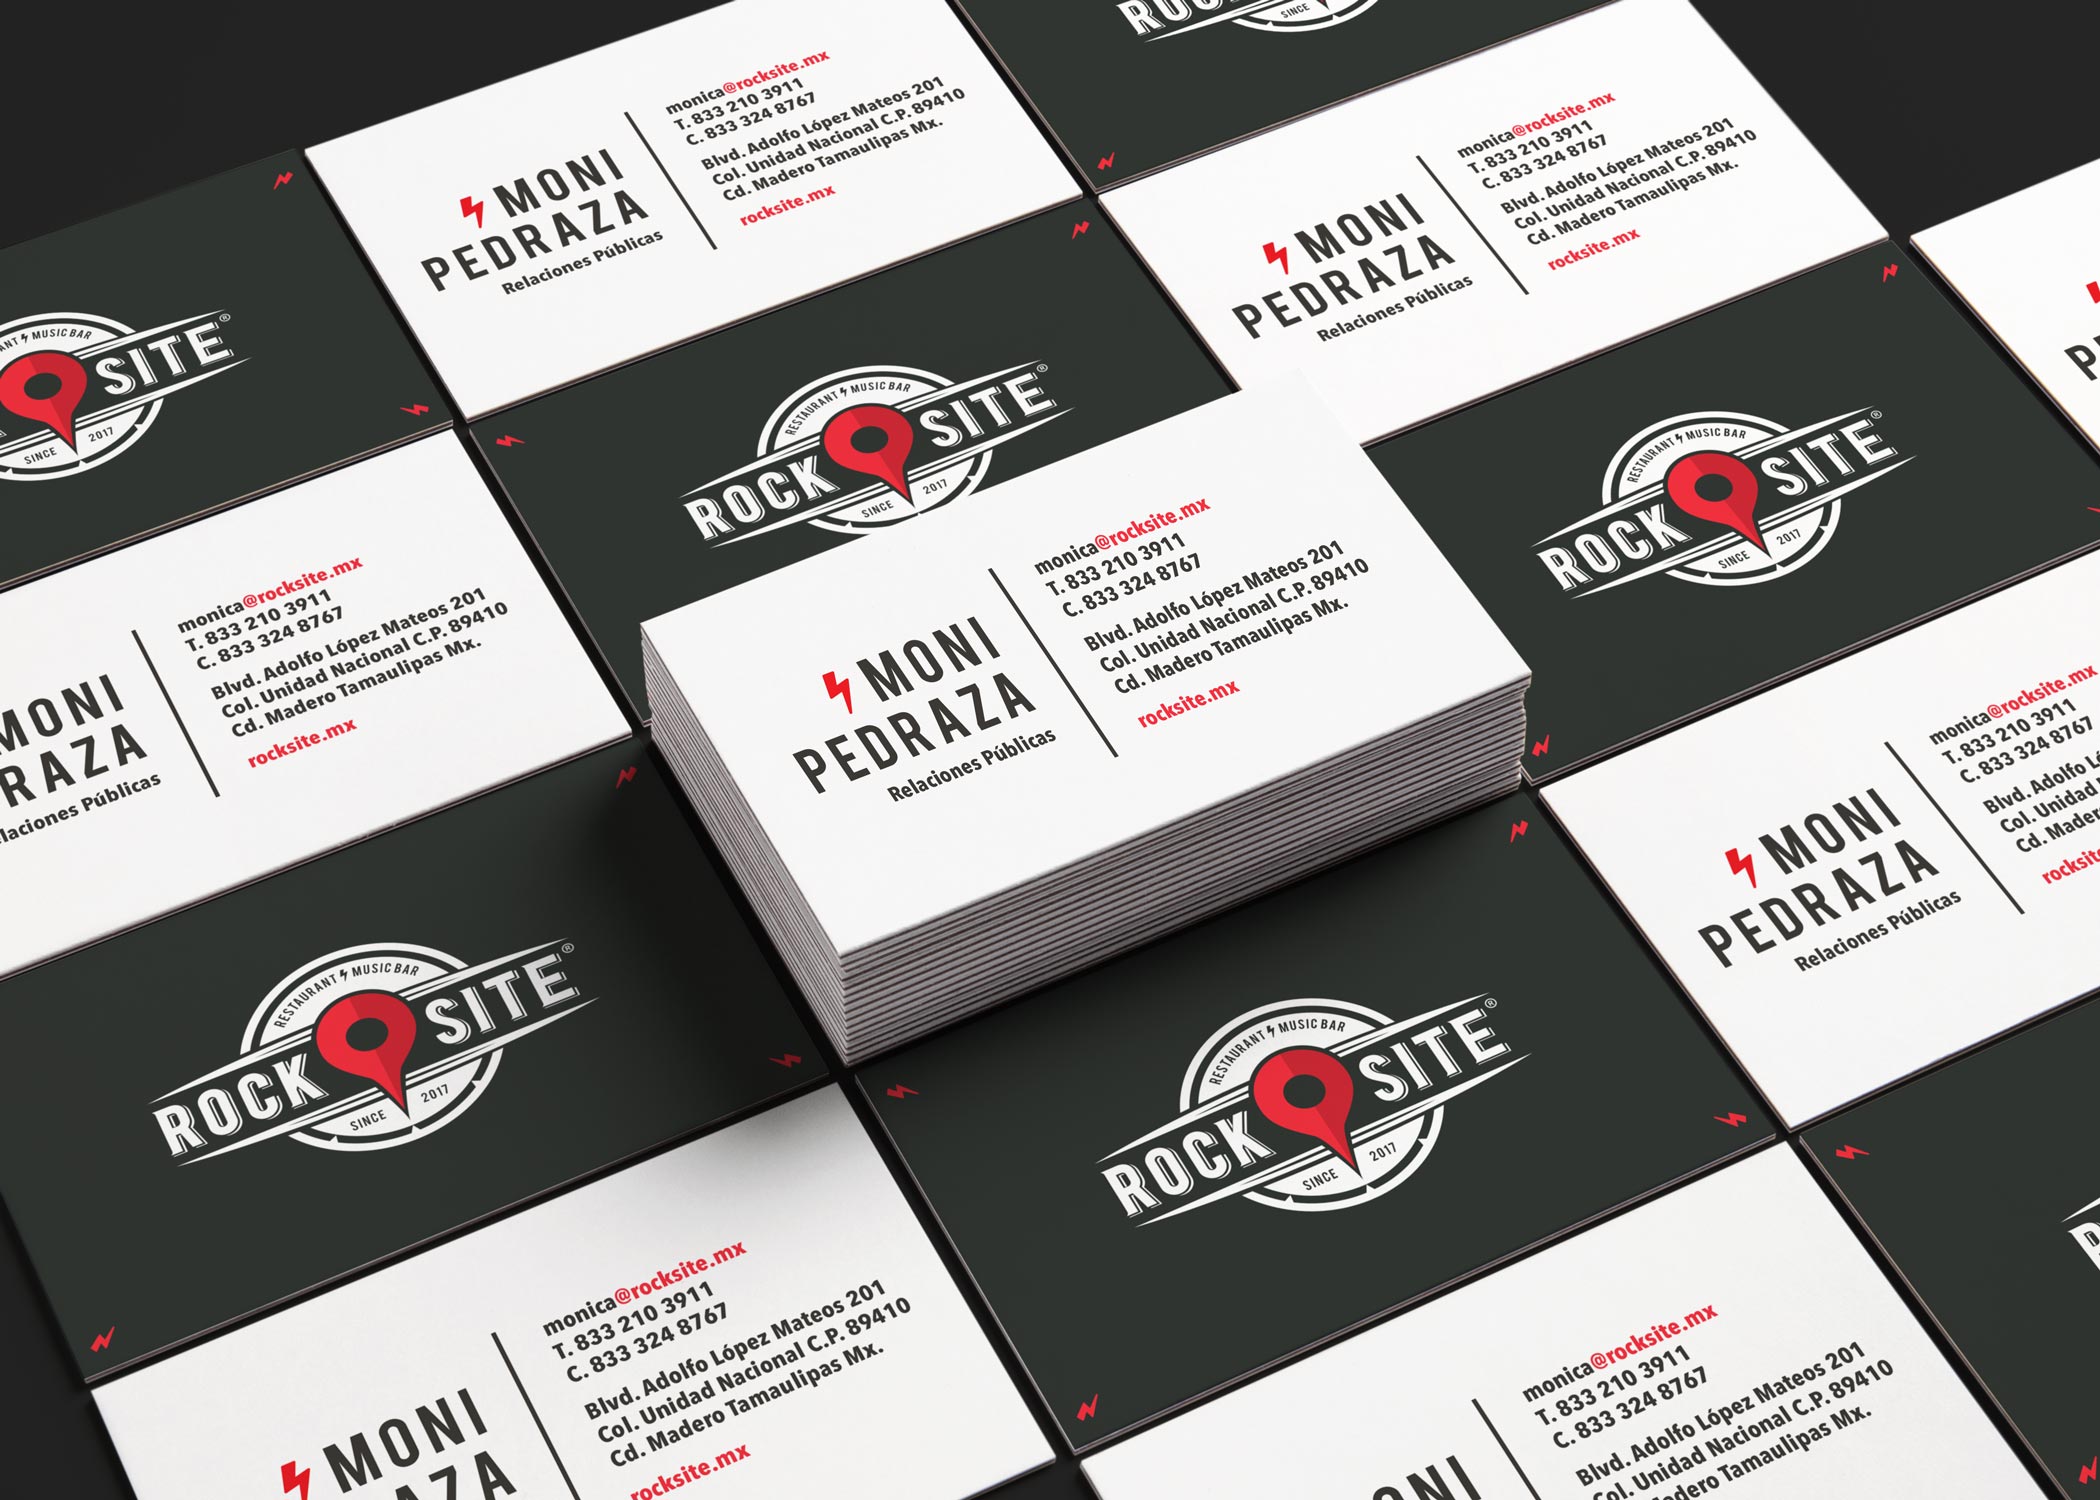 Business cards Rock Site